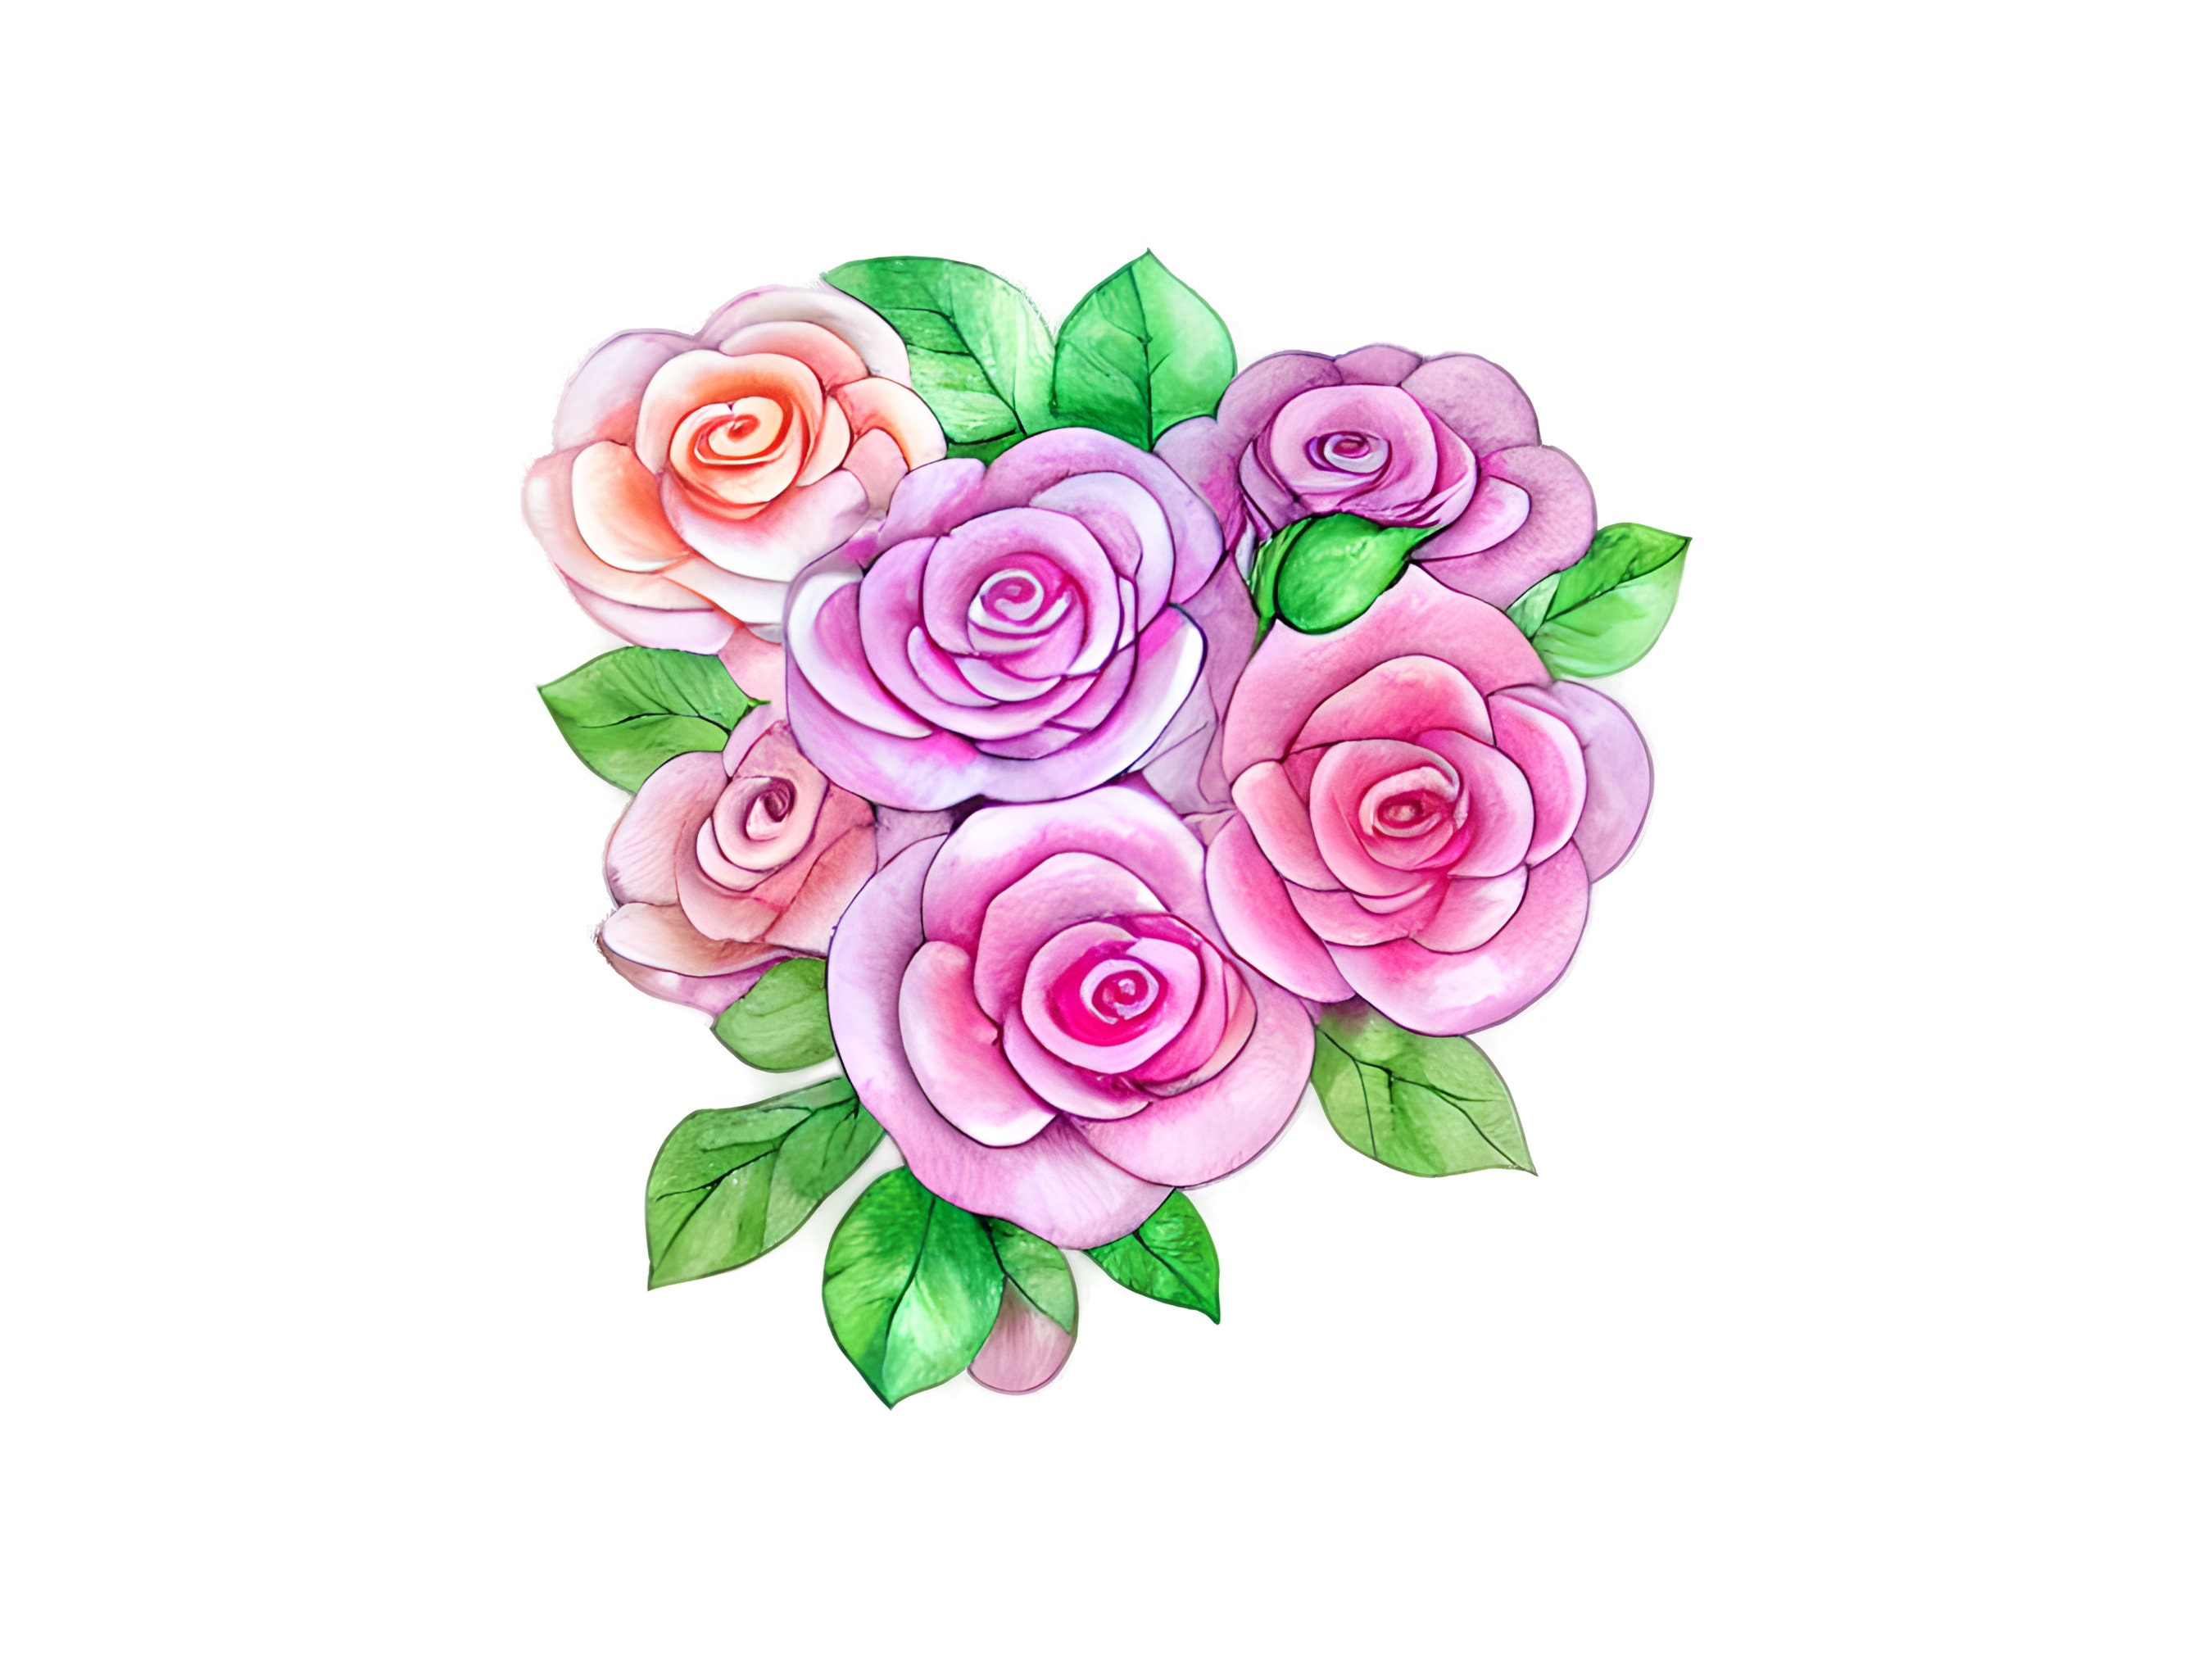 Watercolor Roses PNG Clipart Digital Download Flower - Etsy